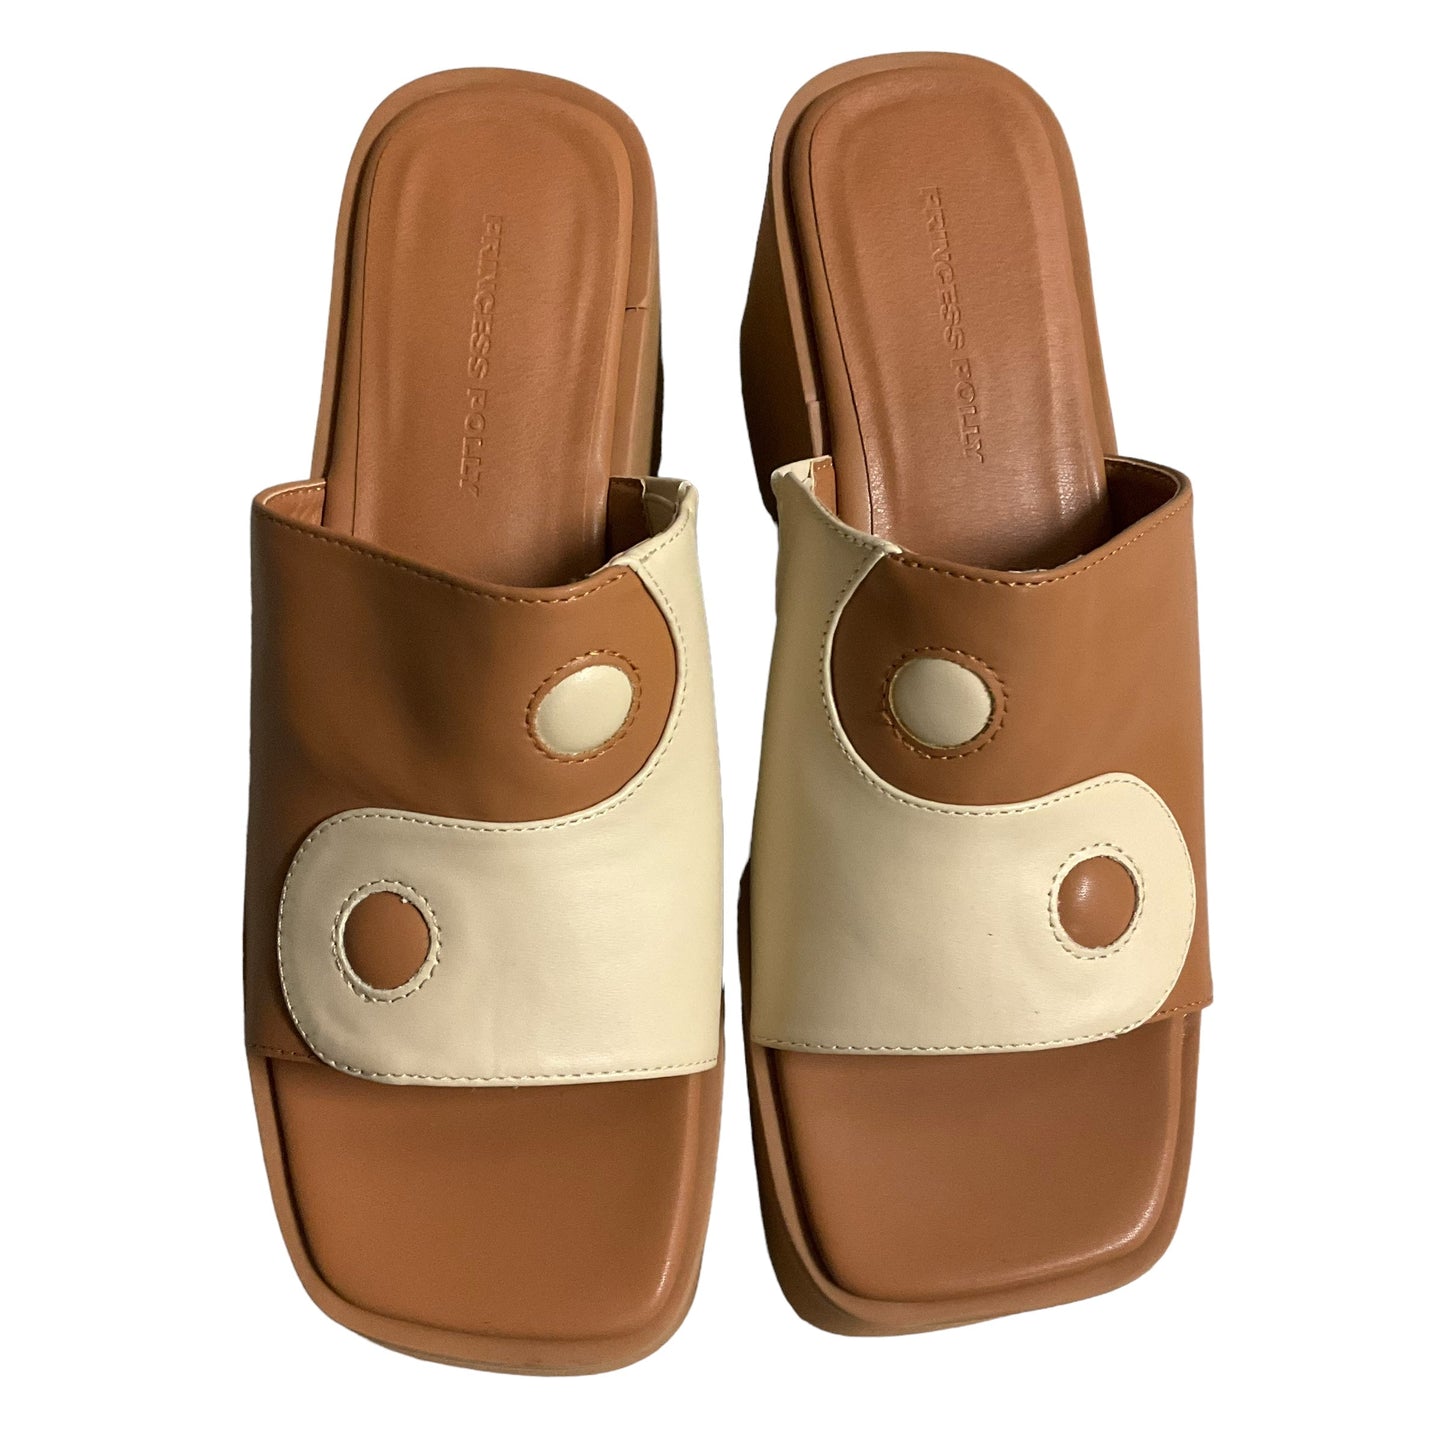 Tan Shoes Heels Wedge Princess Polly, Size 8